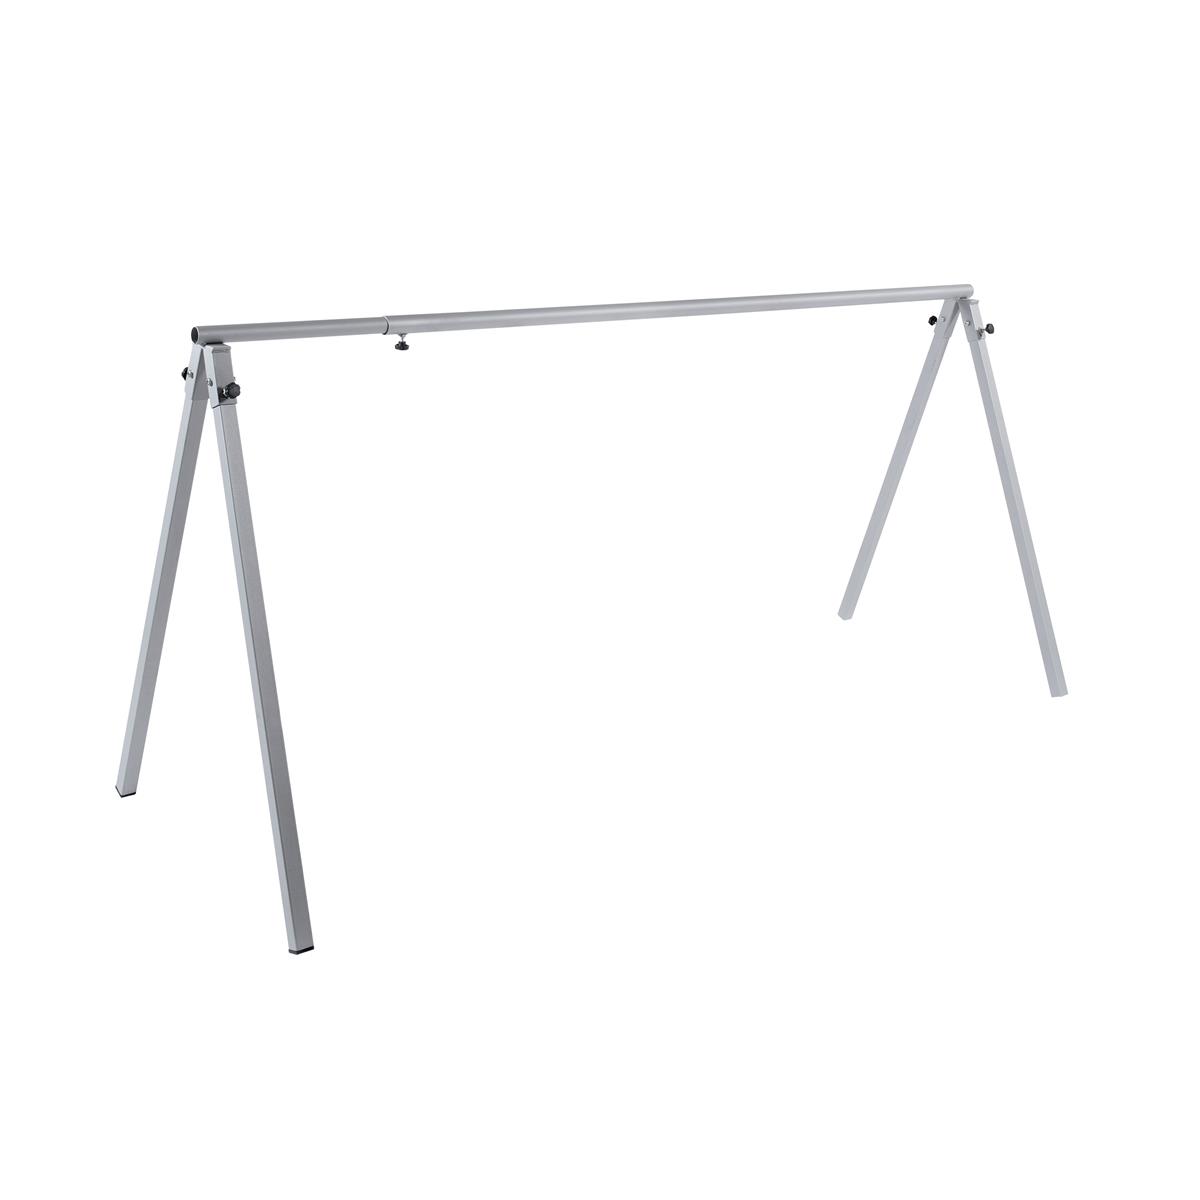 Display bike rack with 5 to 8 spaces adjustable from 2 to 3 meter Bag included